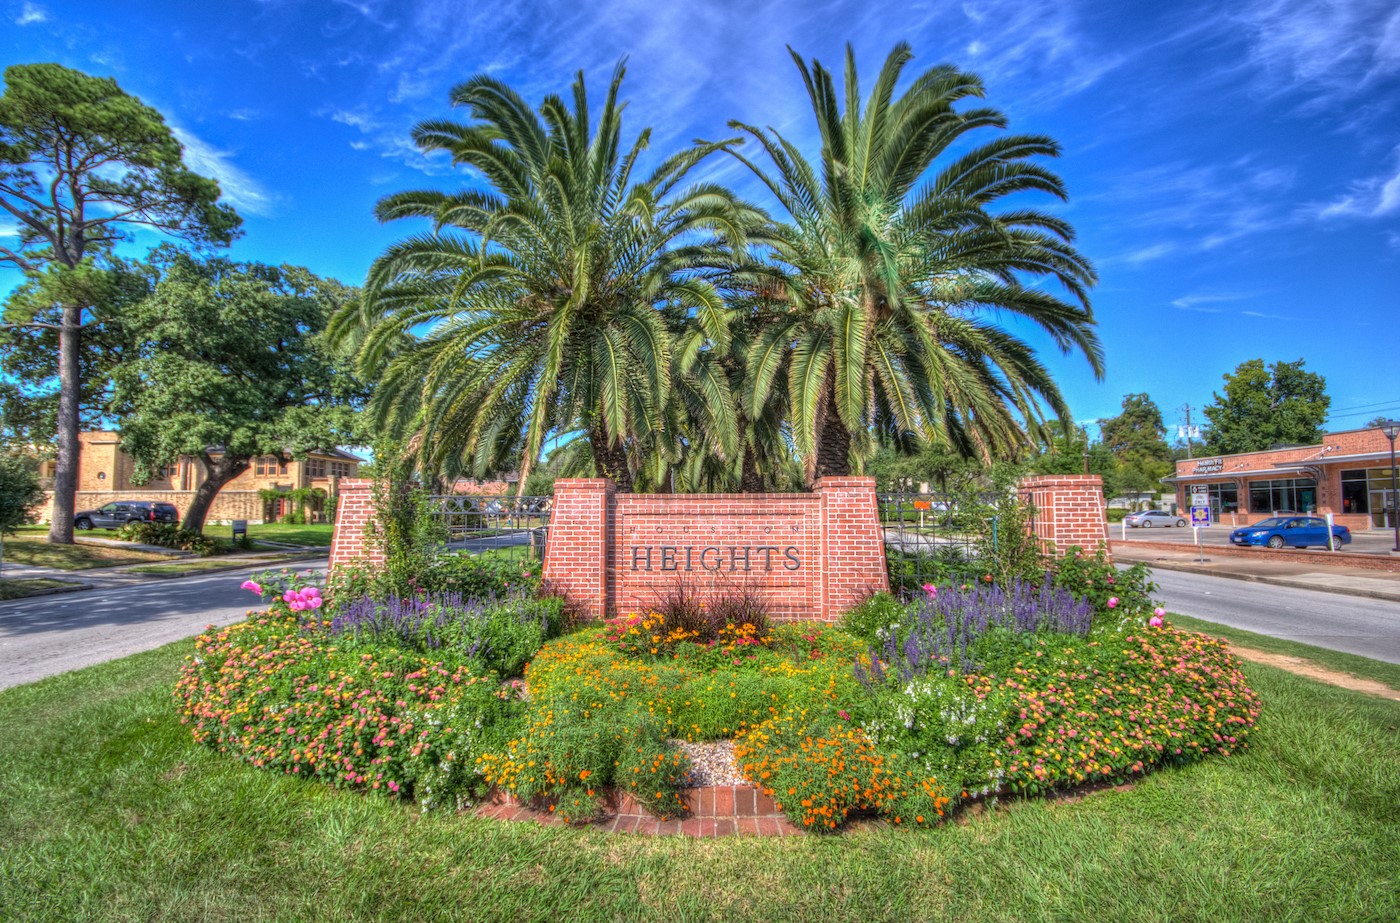 The Heights is a well-known historic district with numerous recreational venues, over 450 top-rated establishments, highly acclaimed schools, and convenient access to Houston's major thoroughfares.